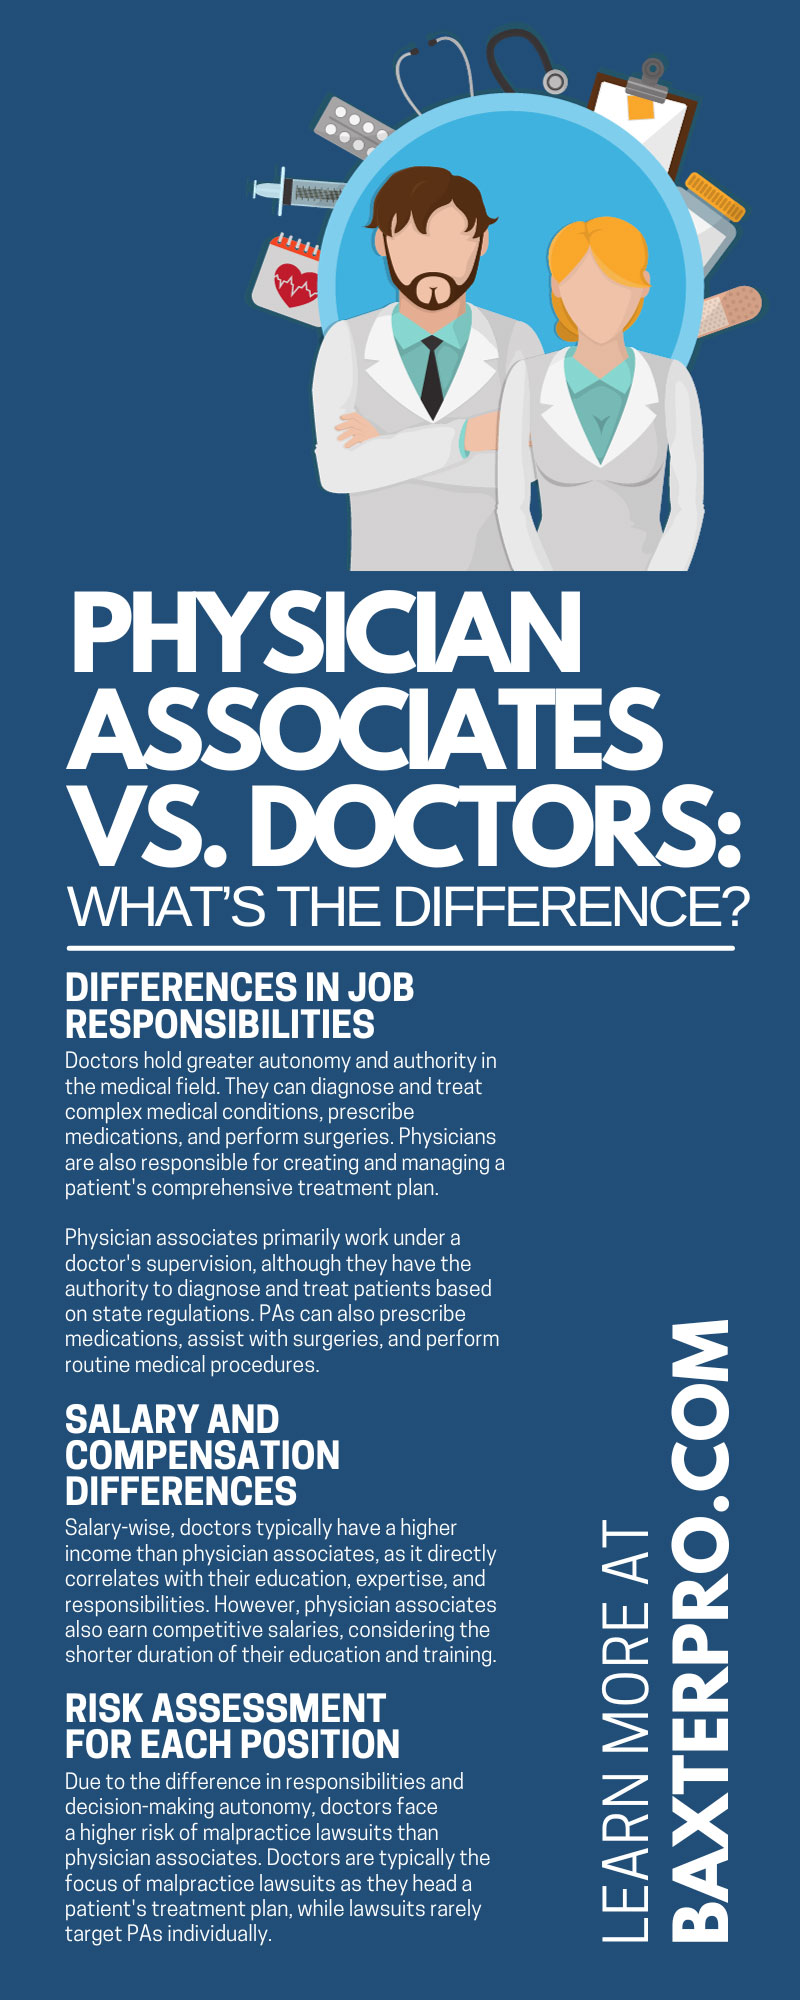 Physician Associates vs. Doctors: What's the Difference?